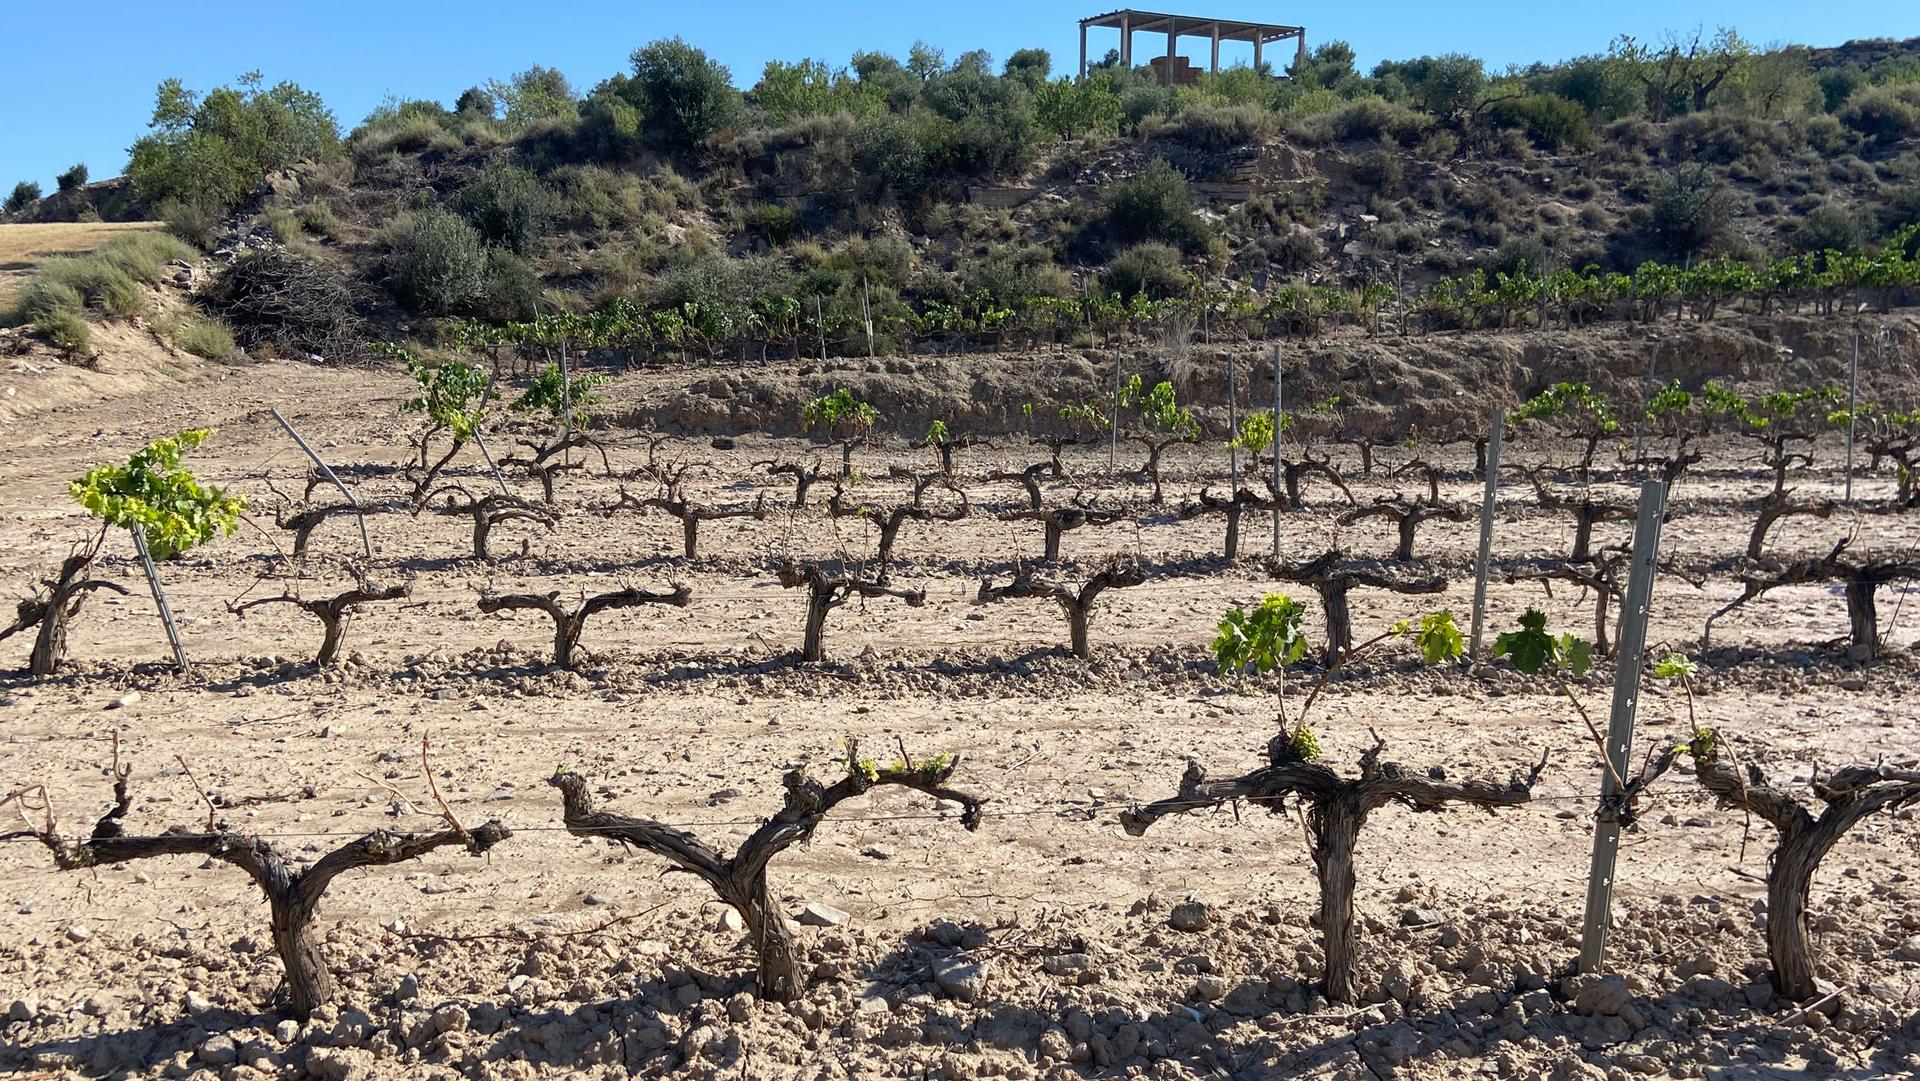 Grapevines destroyed by Lleida’s plague of rabbits, causing millions of dollars in damage.